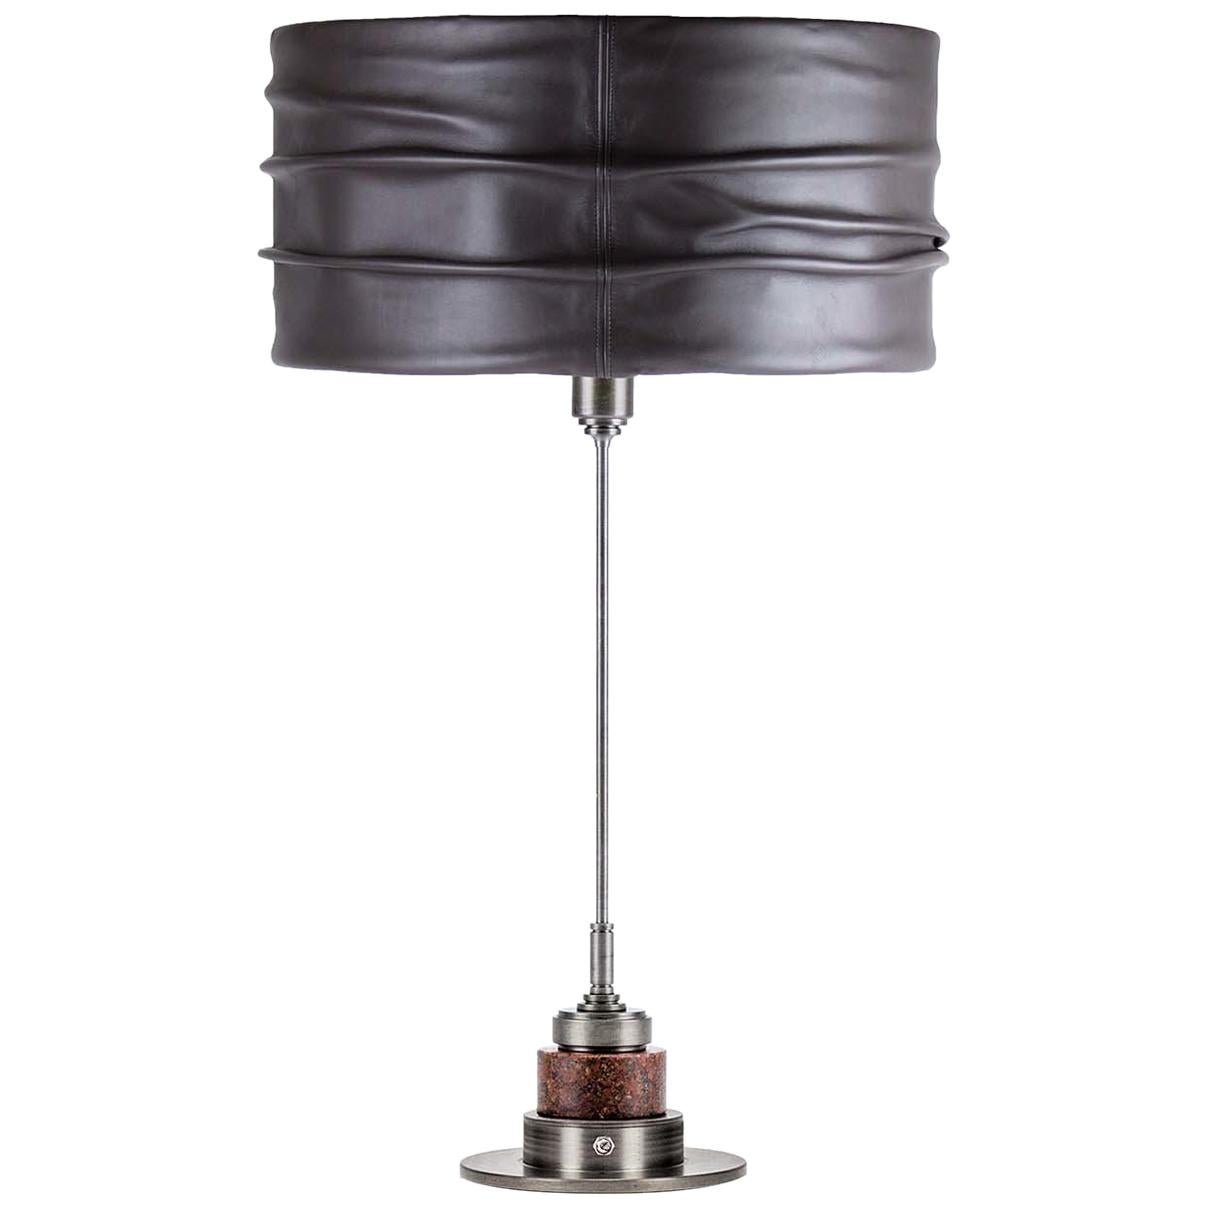 EOS Gray Leather Table Lamp by Acanthus